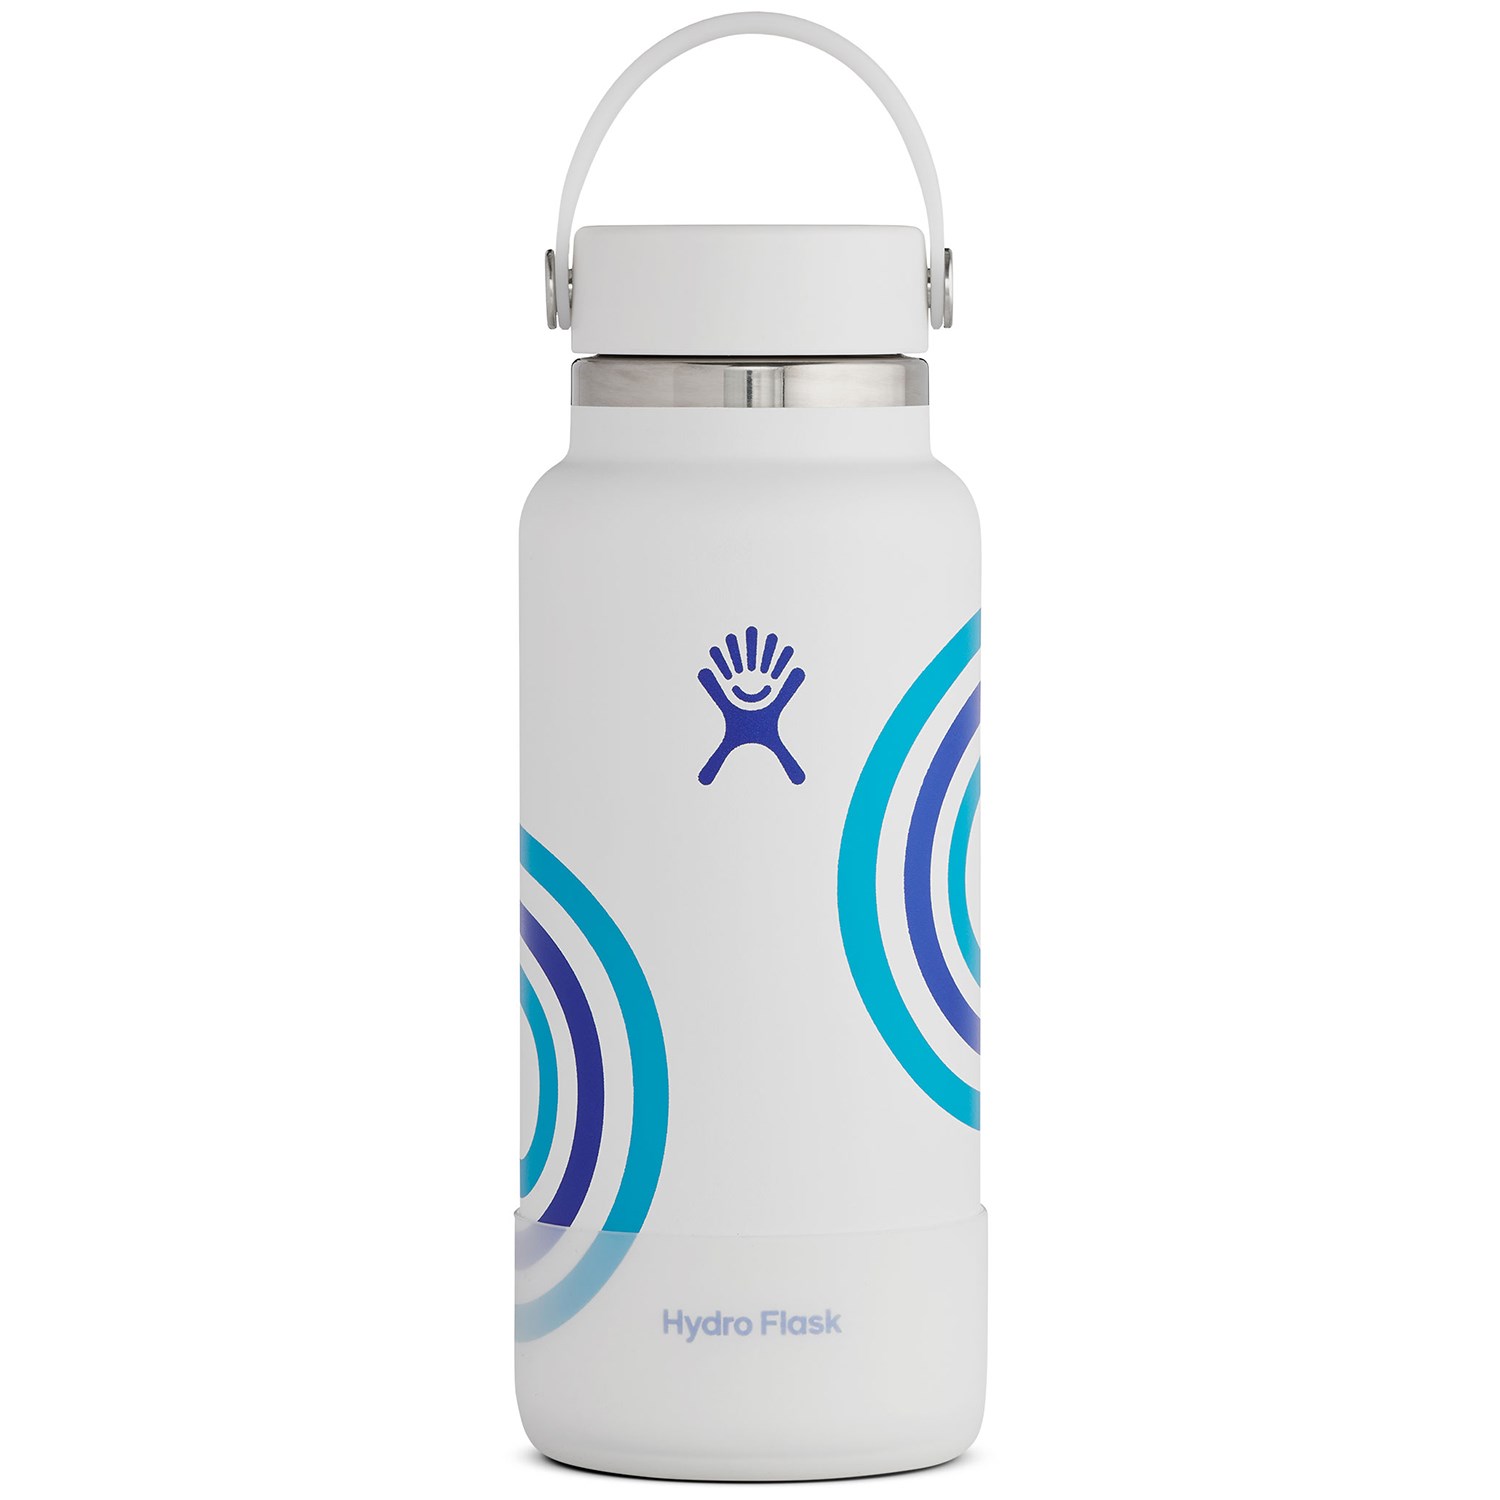 https://images.evo.com/imgp/zoom/204426/836125/hydro-flask-refill-for-good-32oz-wide-mouth-water-bottle-.jpg